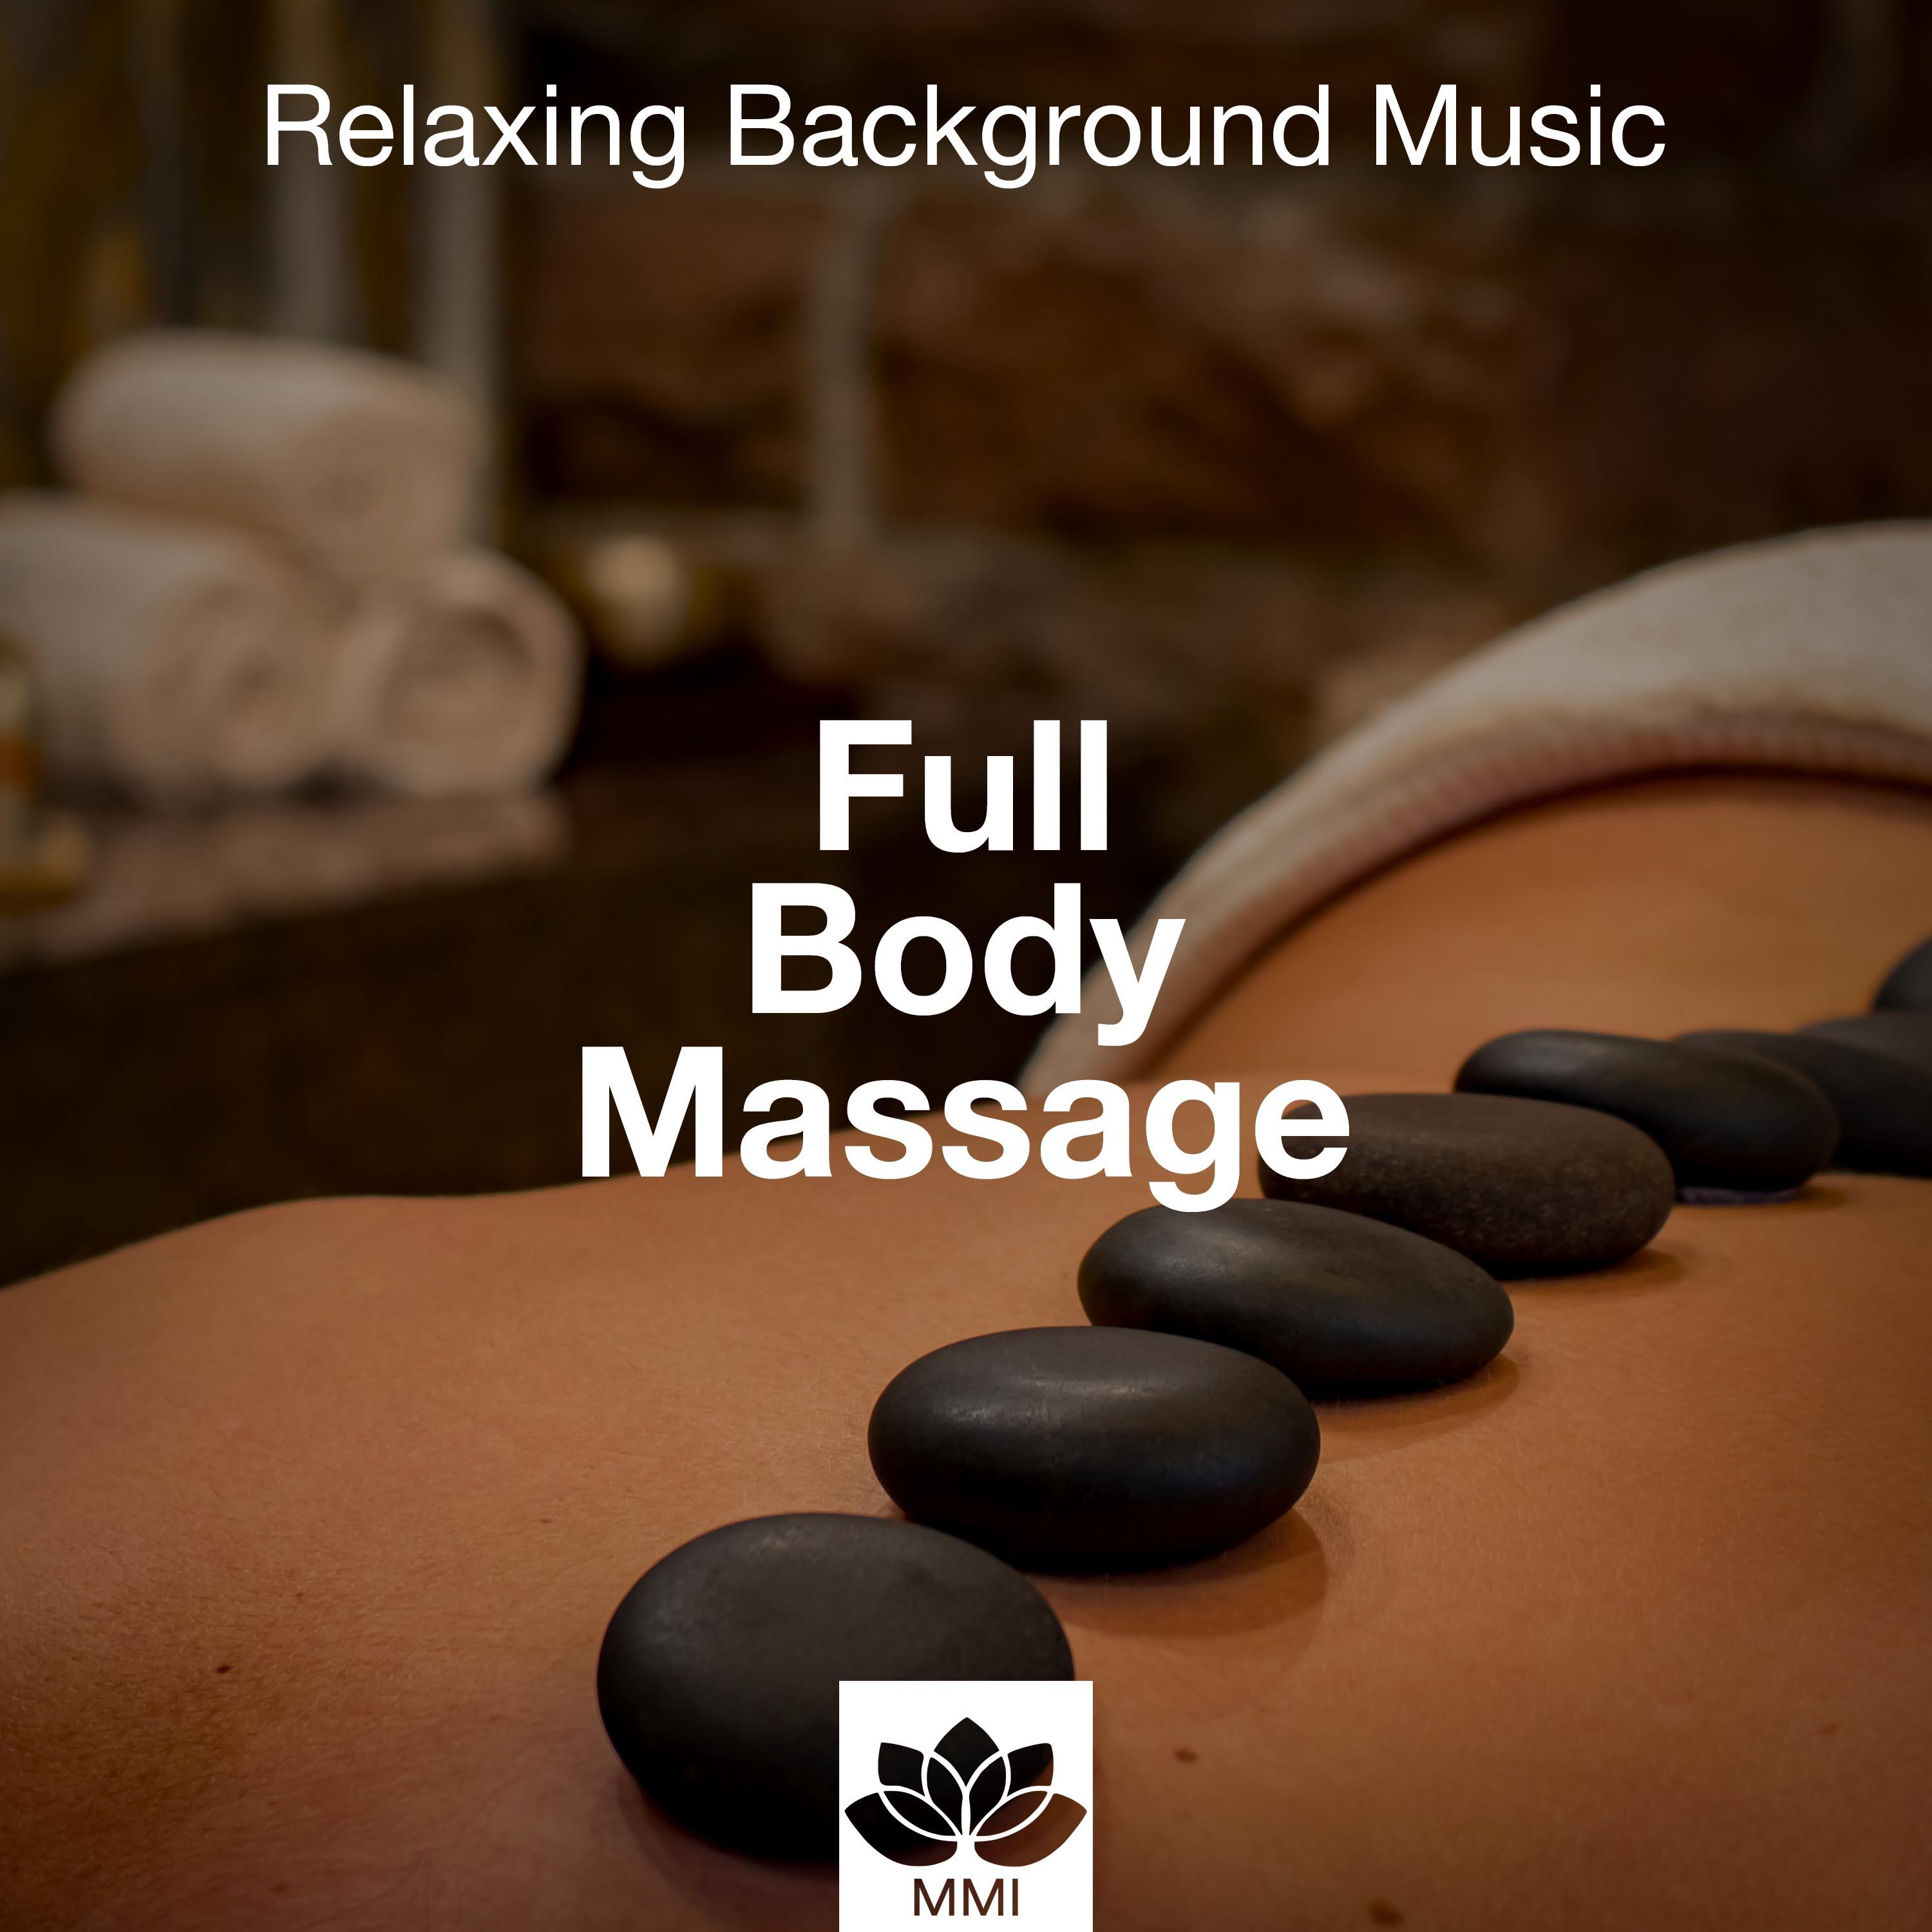 Full Body Massage: Relaxing Background Music with Nature Sounds